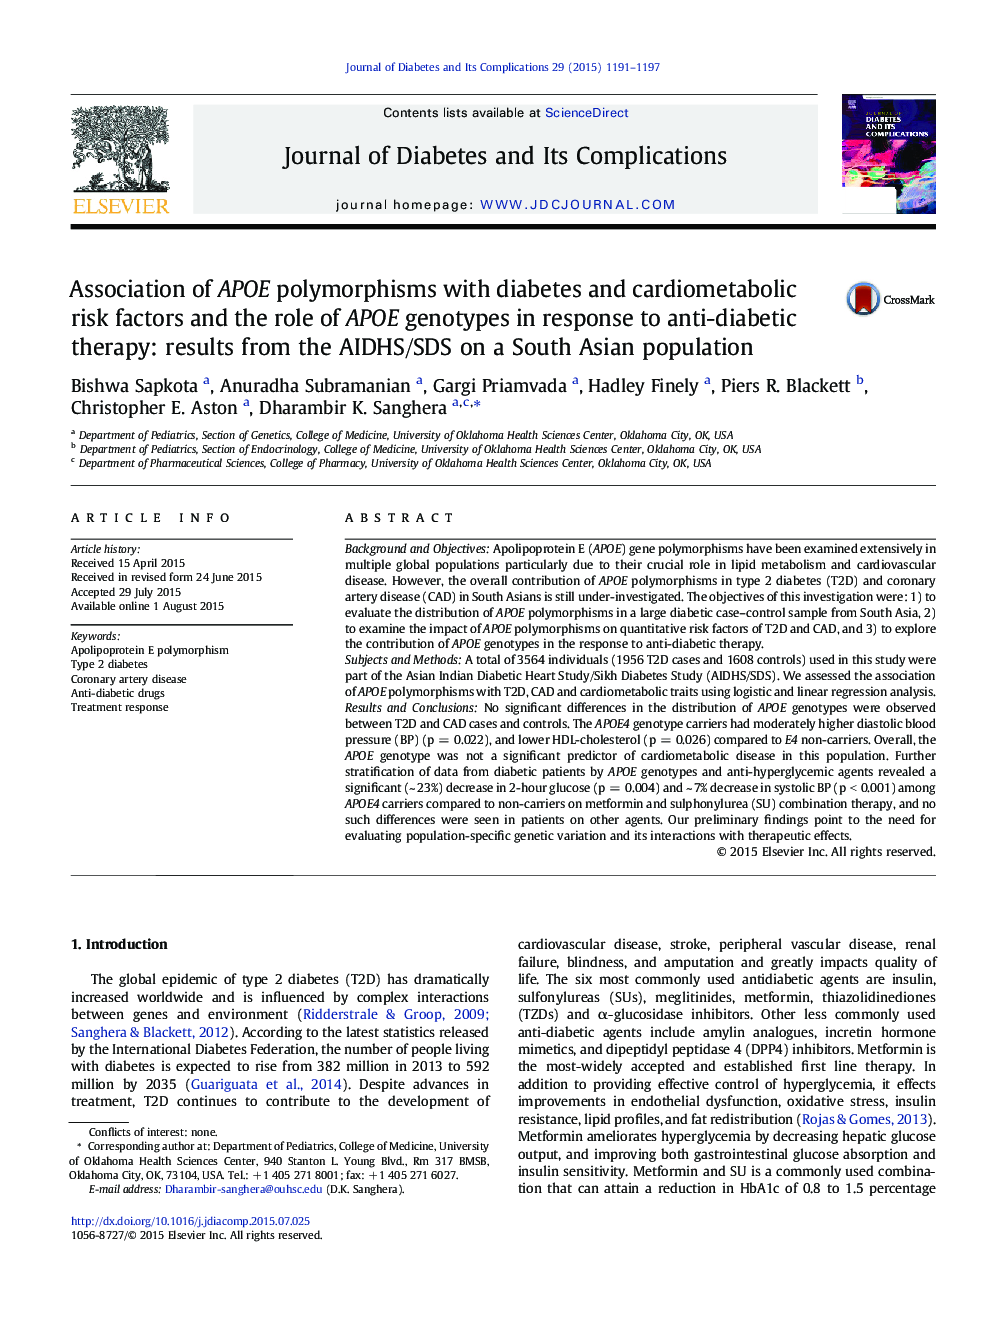 Association of APOE polymorphisms with diabetes and cardiometabolic risk factors and the role of APOE genotypes in response to anti-diabetic therapy: results from the AIDHS/SDS on a South Asian population